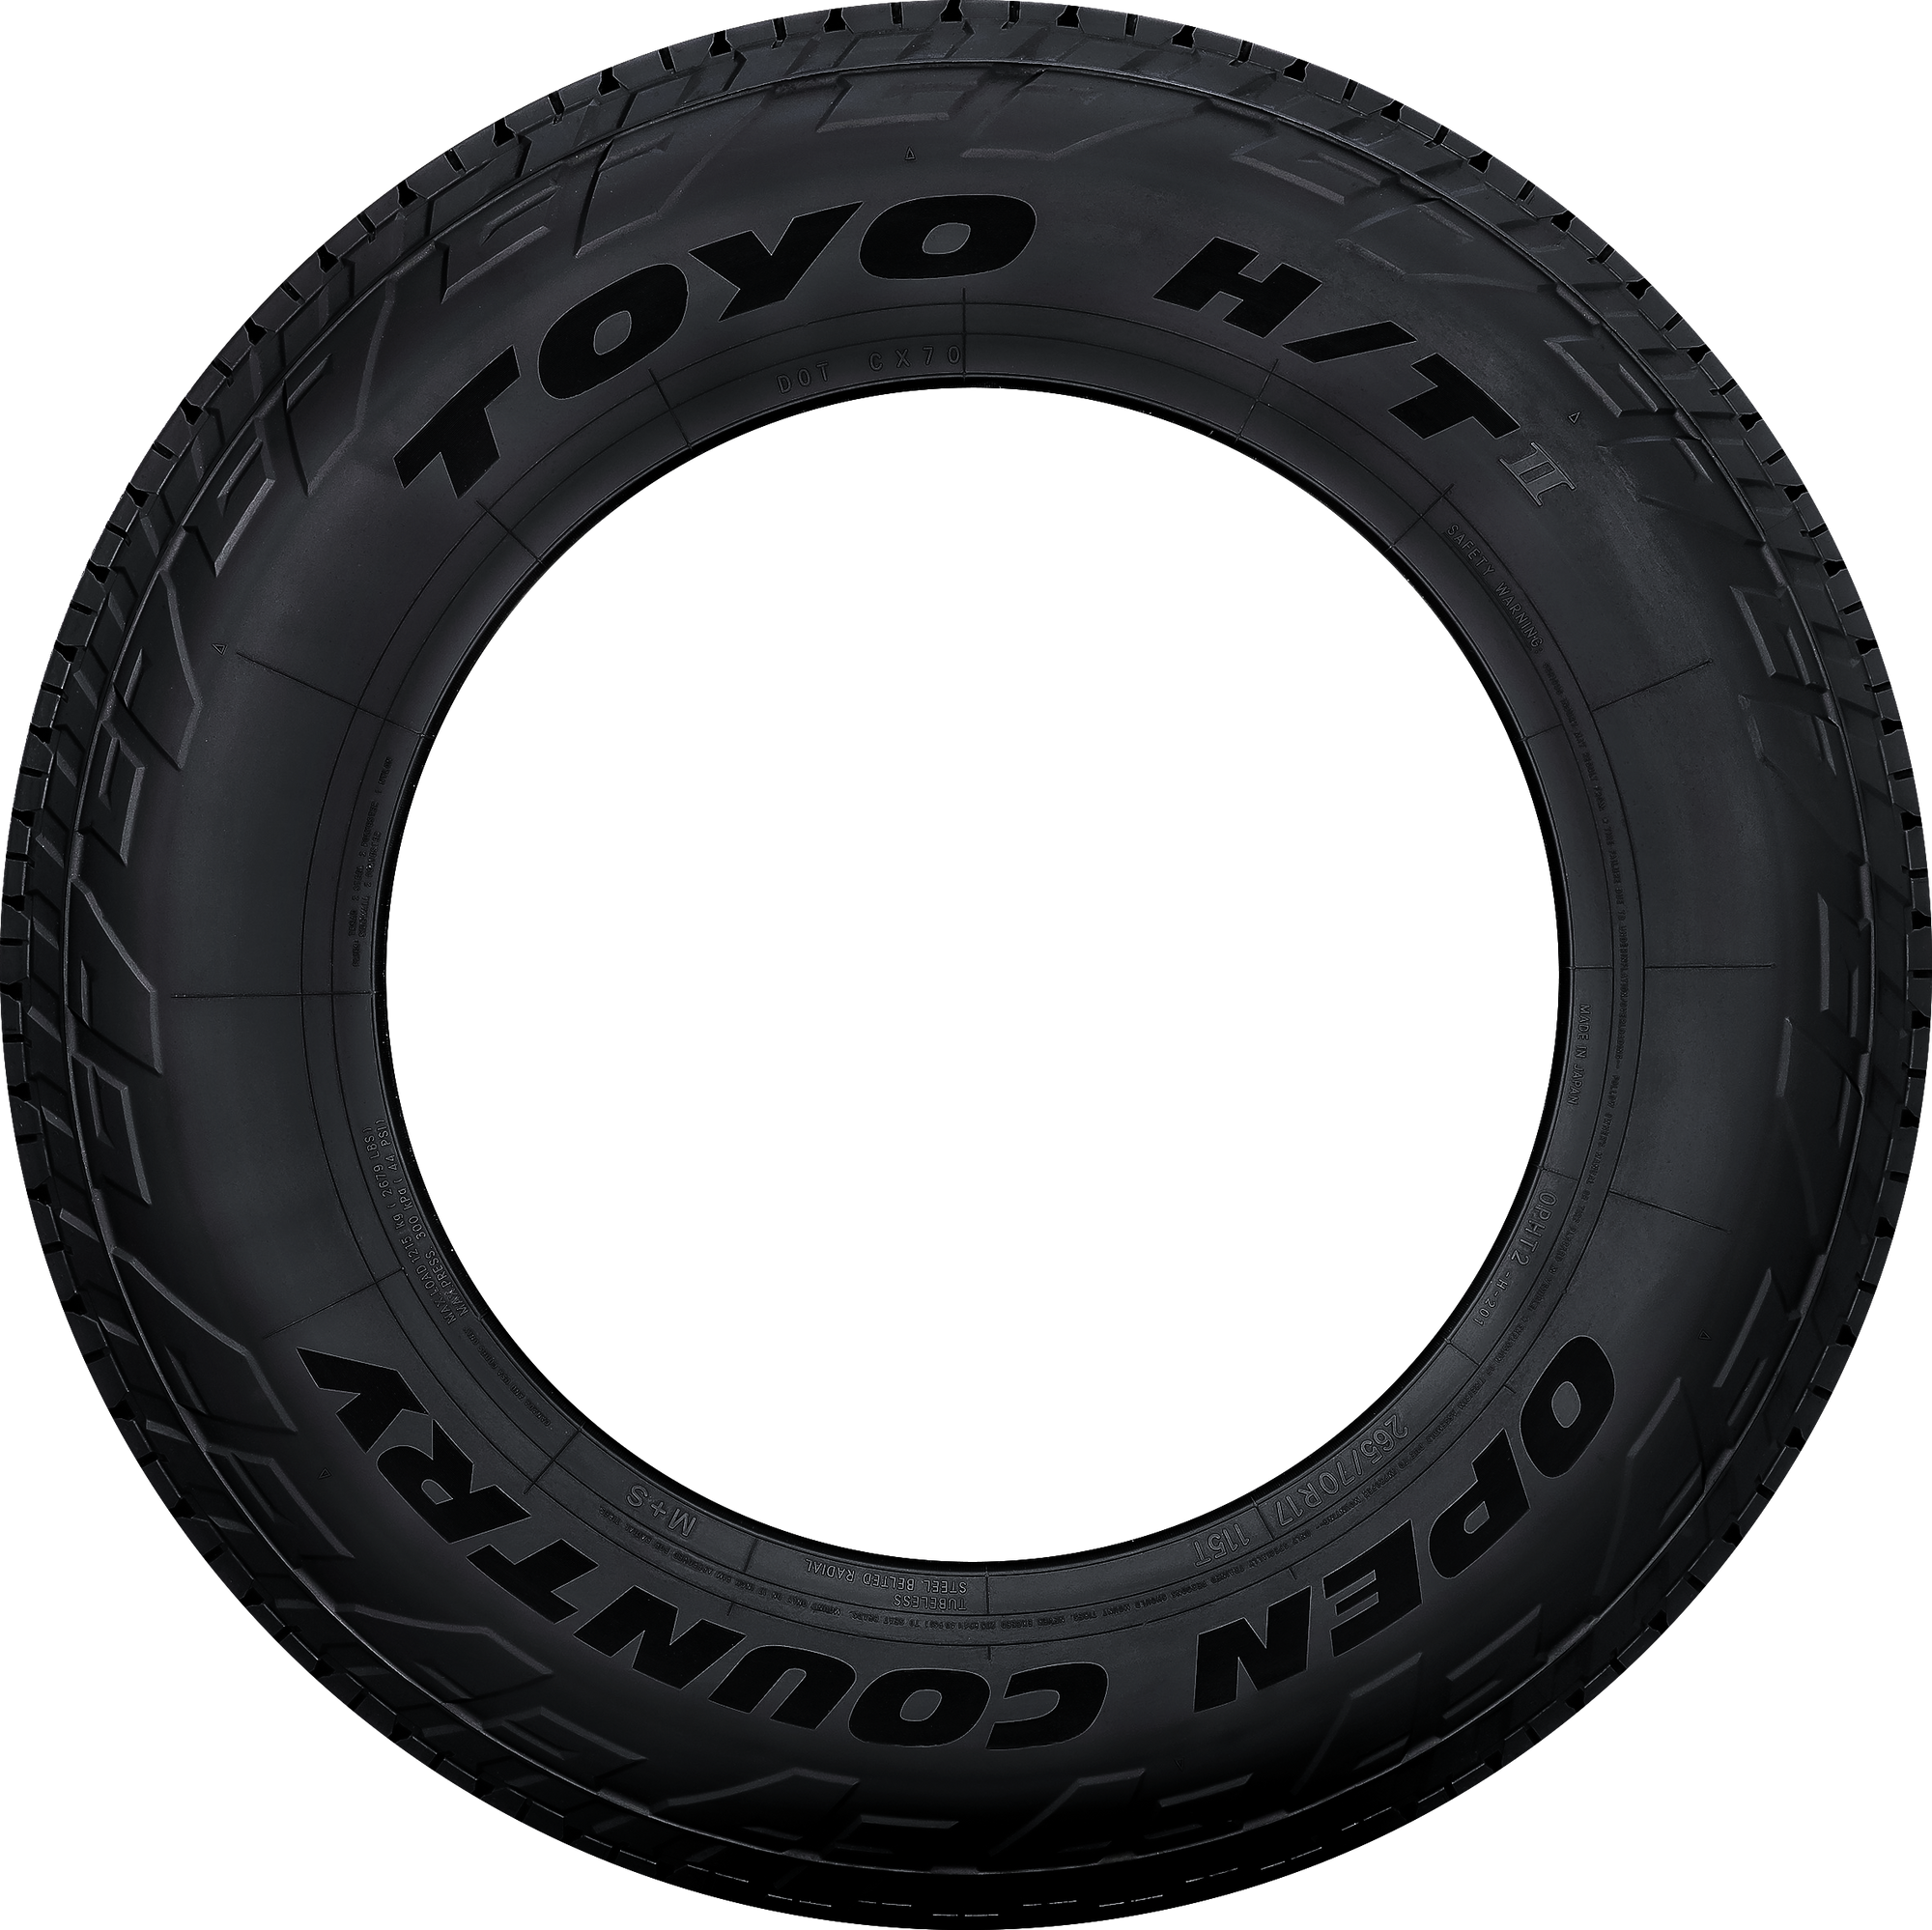 Toyo Open Country H/T II 235/65R18